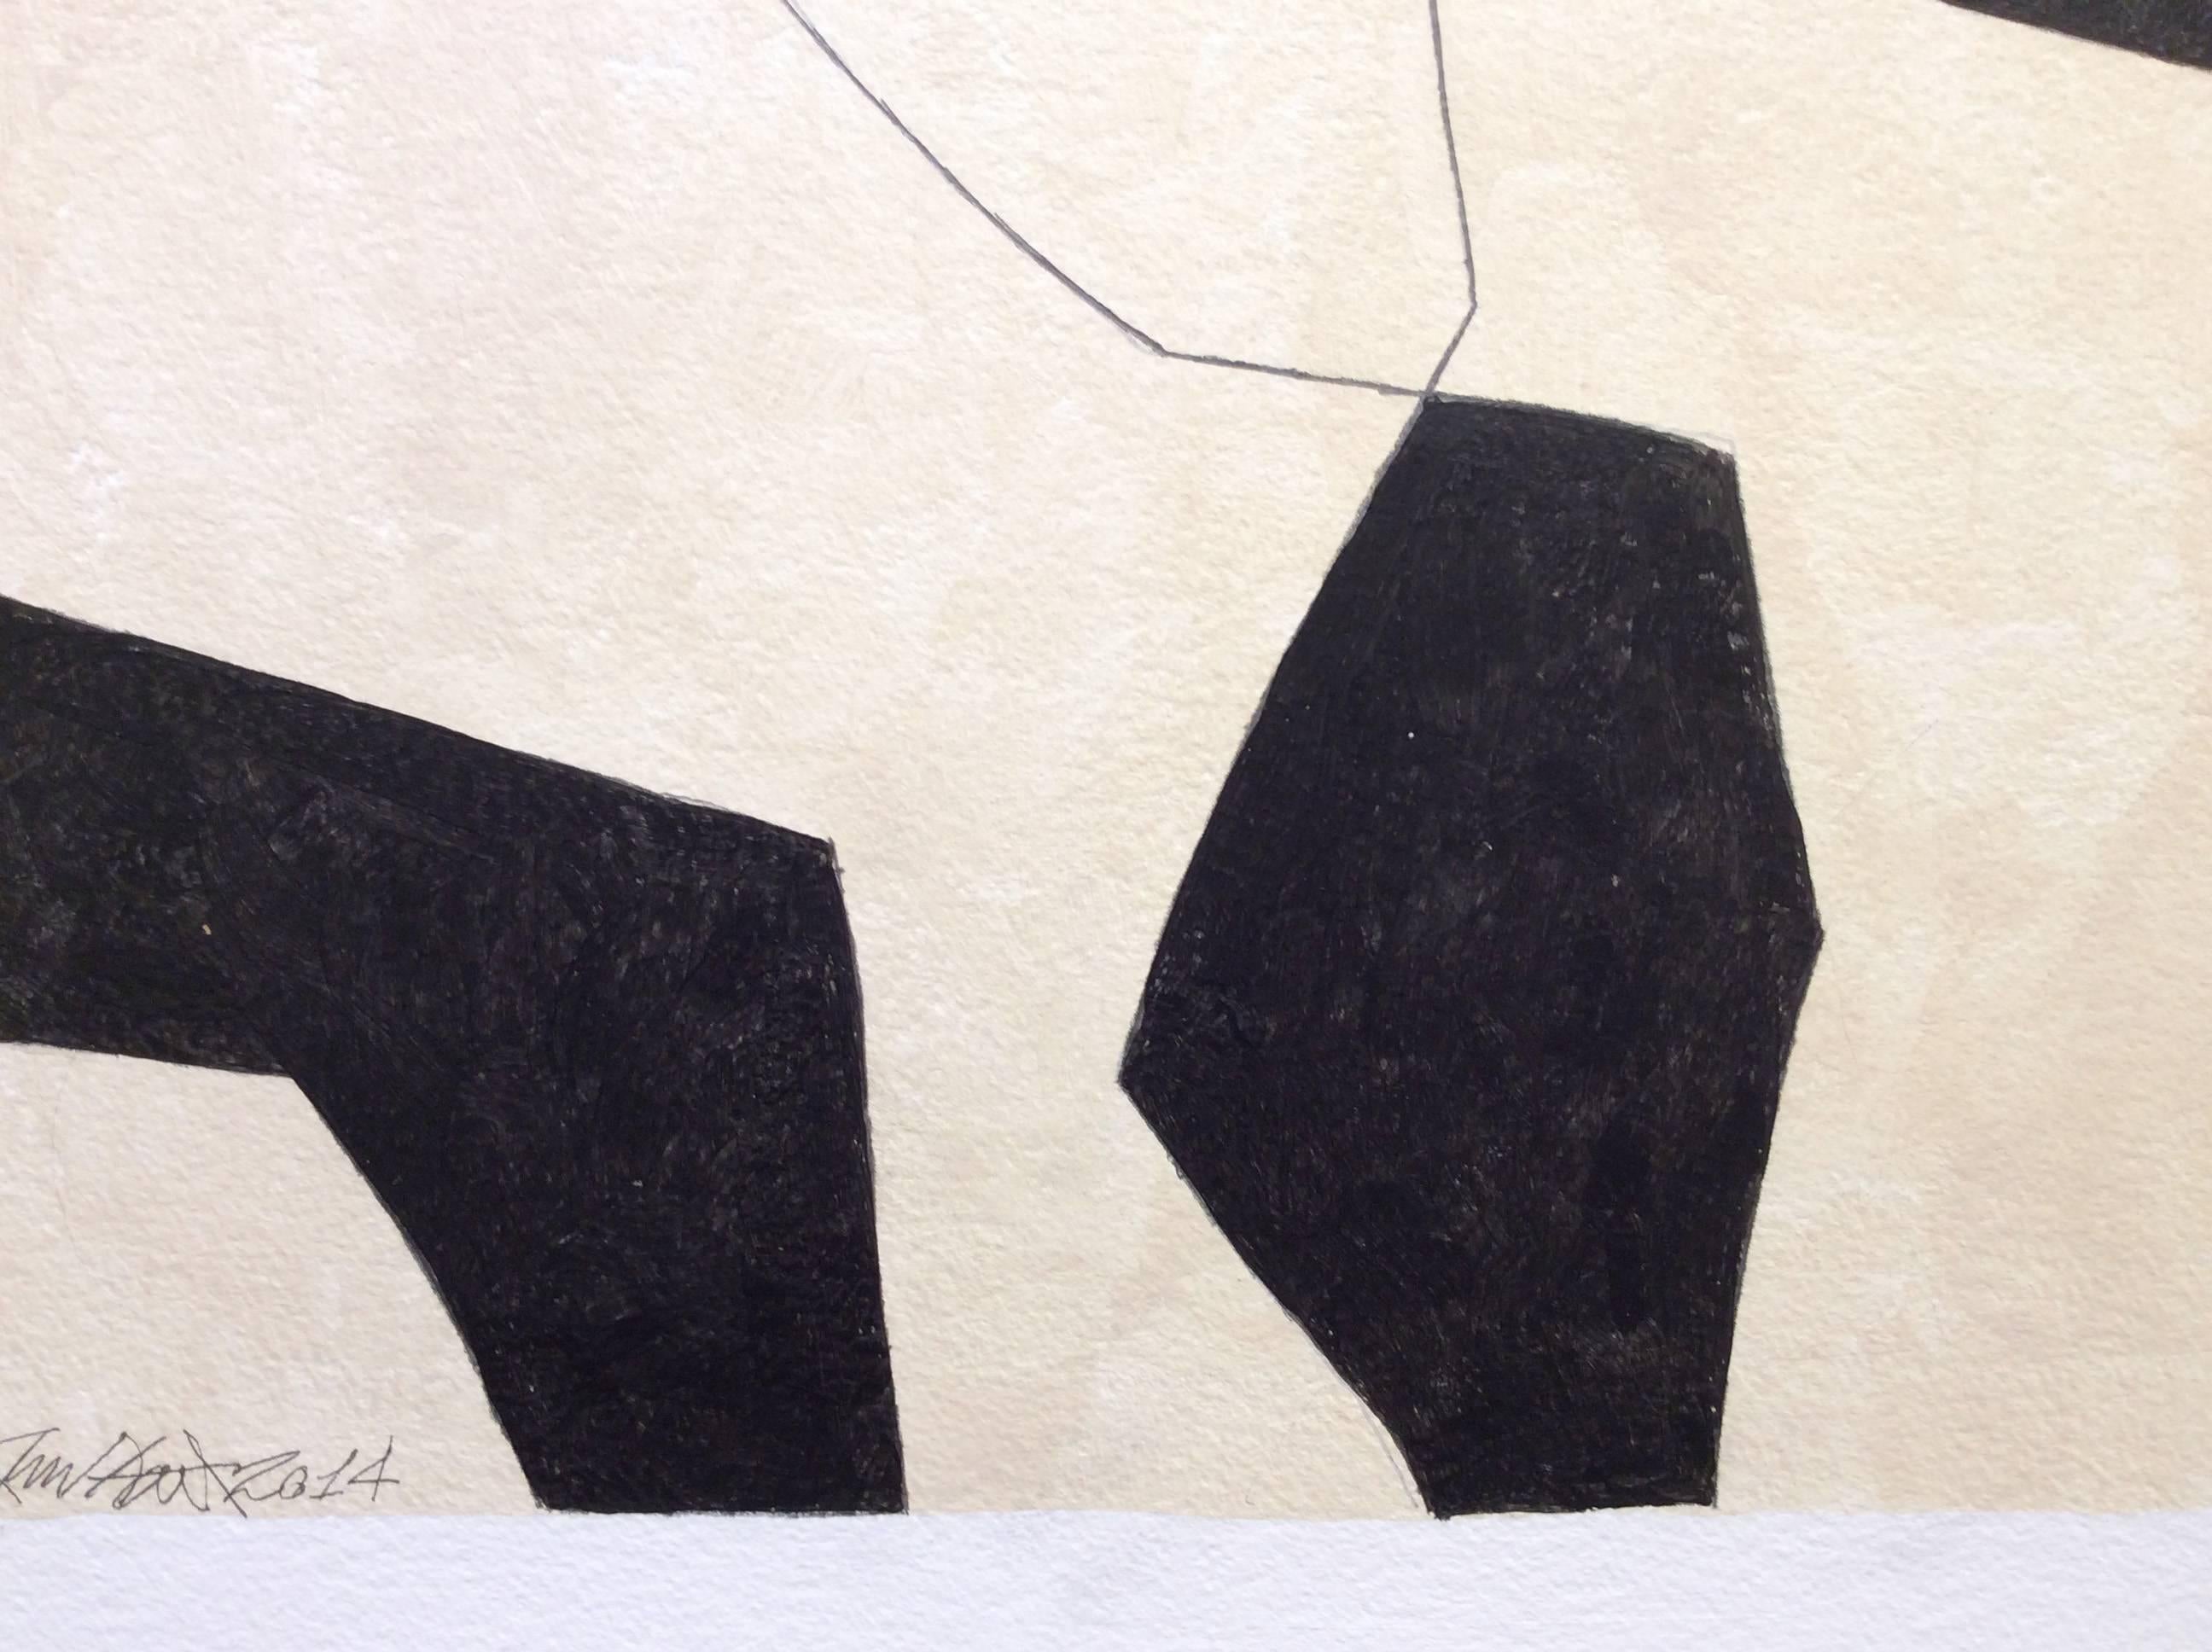 Untitled 5 (Abstract Black and White Line Drawing on Arches Paper) - Minimalist Art by Ralph Stout